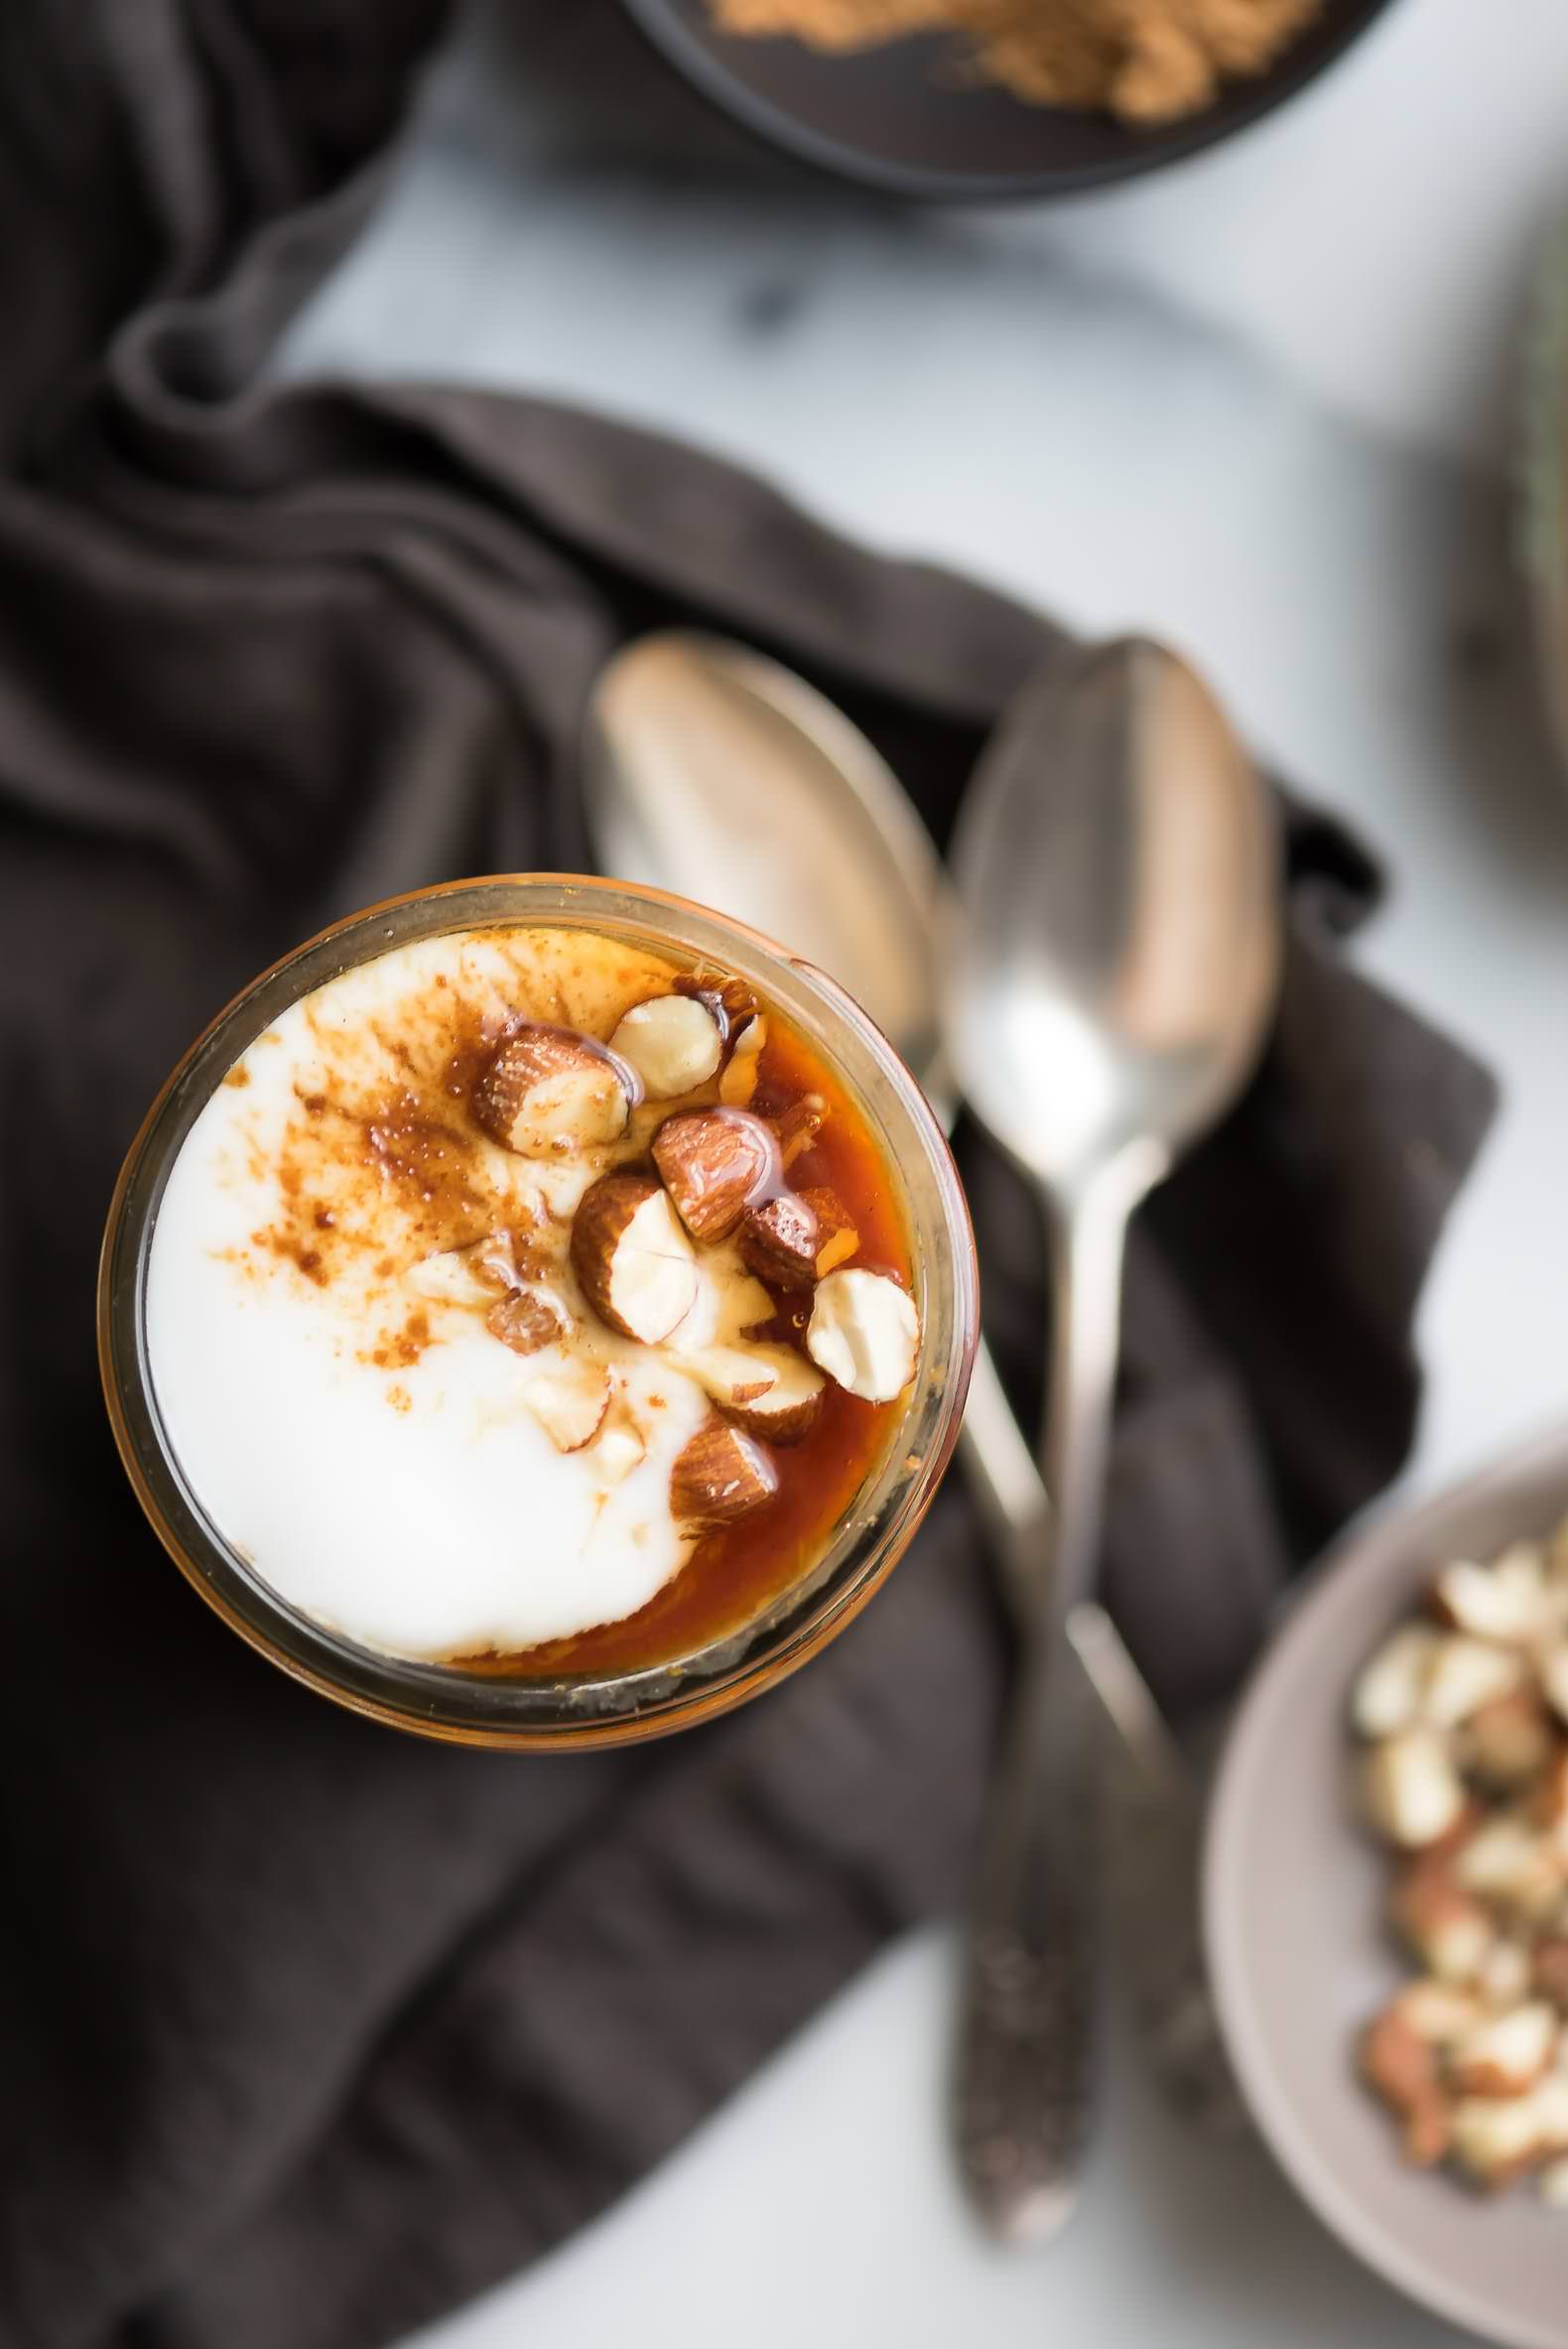 Pumpkin Cheesecake Overnight Oats are a step up from basic overnight oats in a jar! Filled with spice and a creamy cheesecake layer, they are a dessert inspired, healthy breakfast!